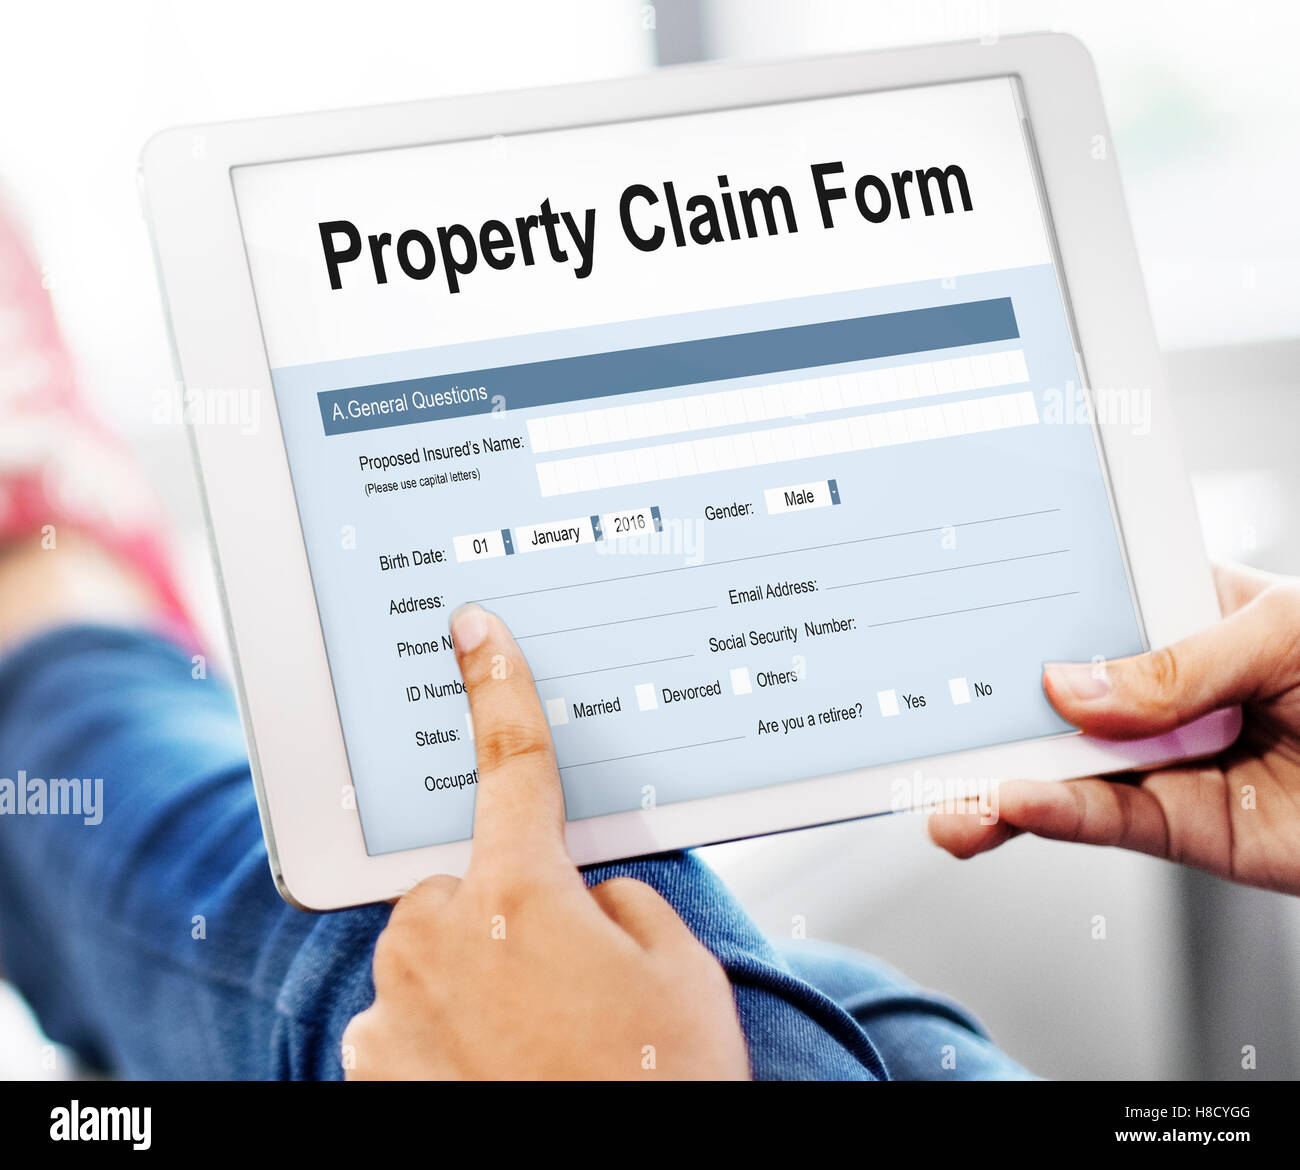 Property Release Claim Form Concept Stock Photo 125674880 Alamy